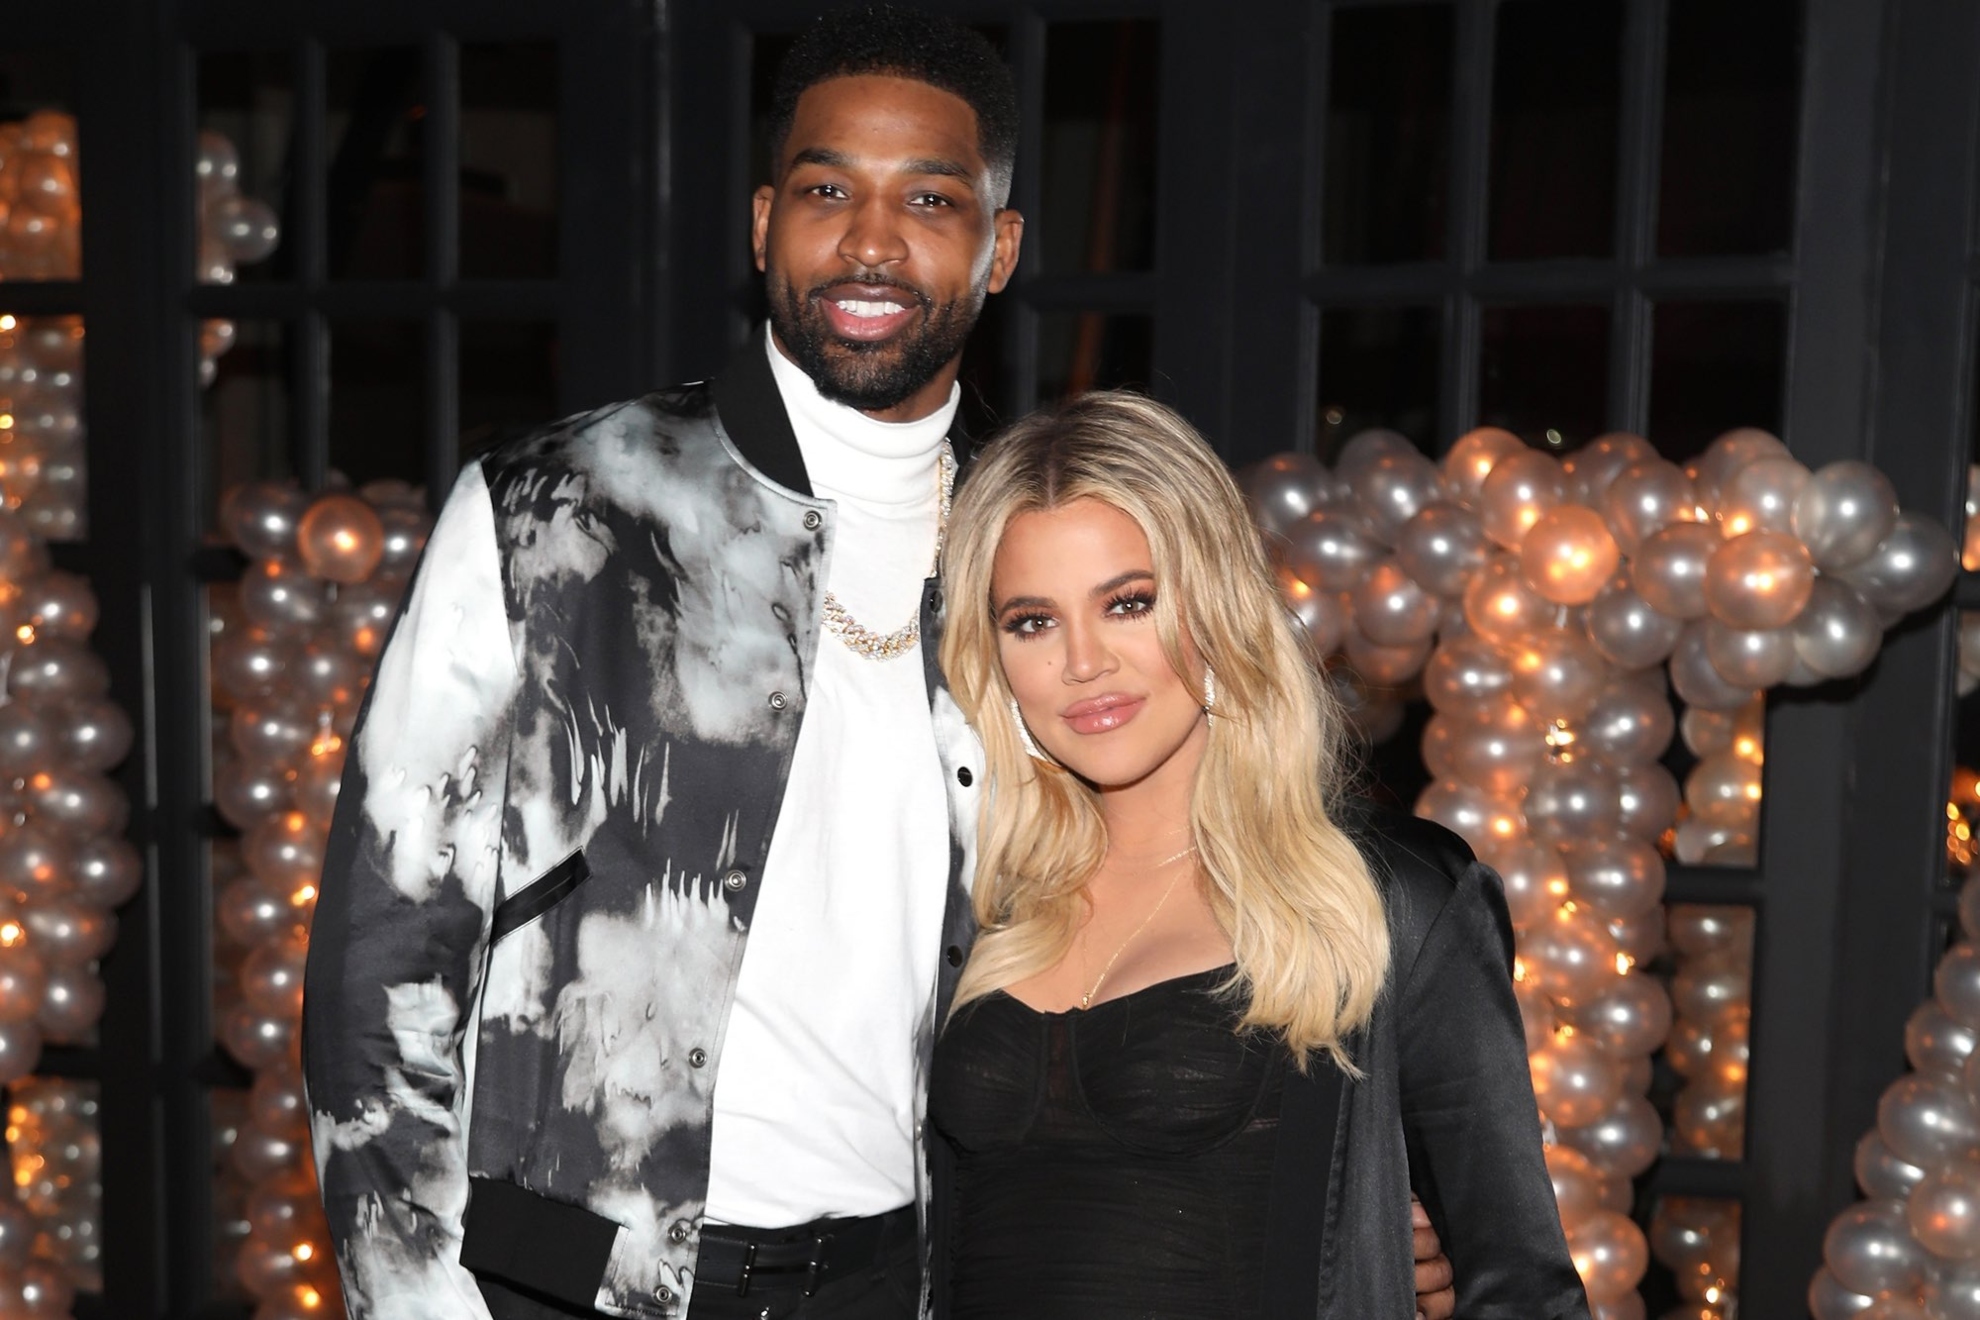 Khloe Kardashian and Tristan Thompson almost got married... almost